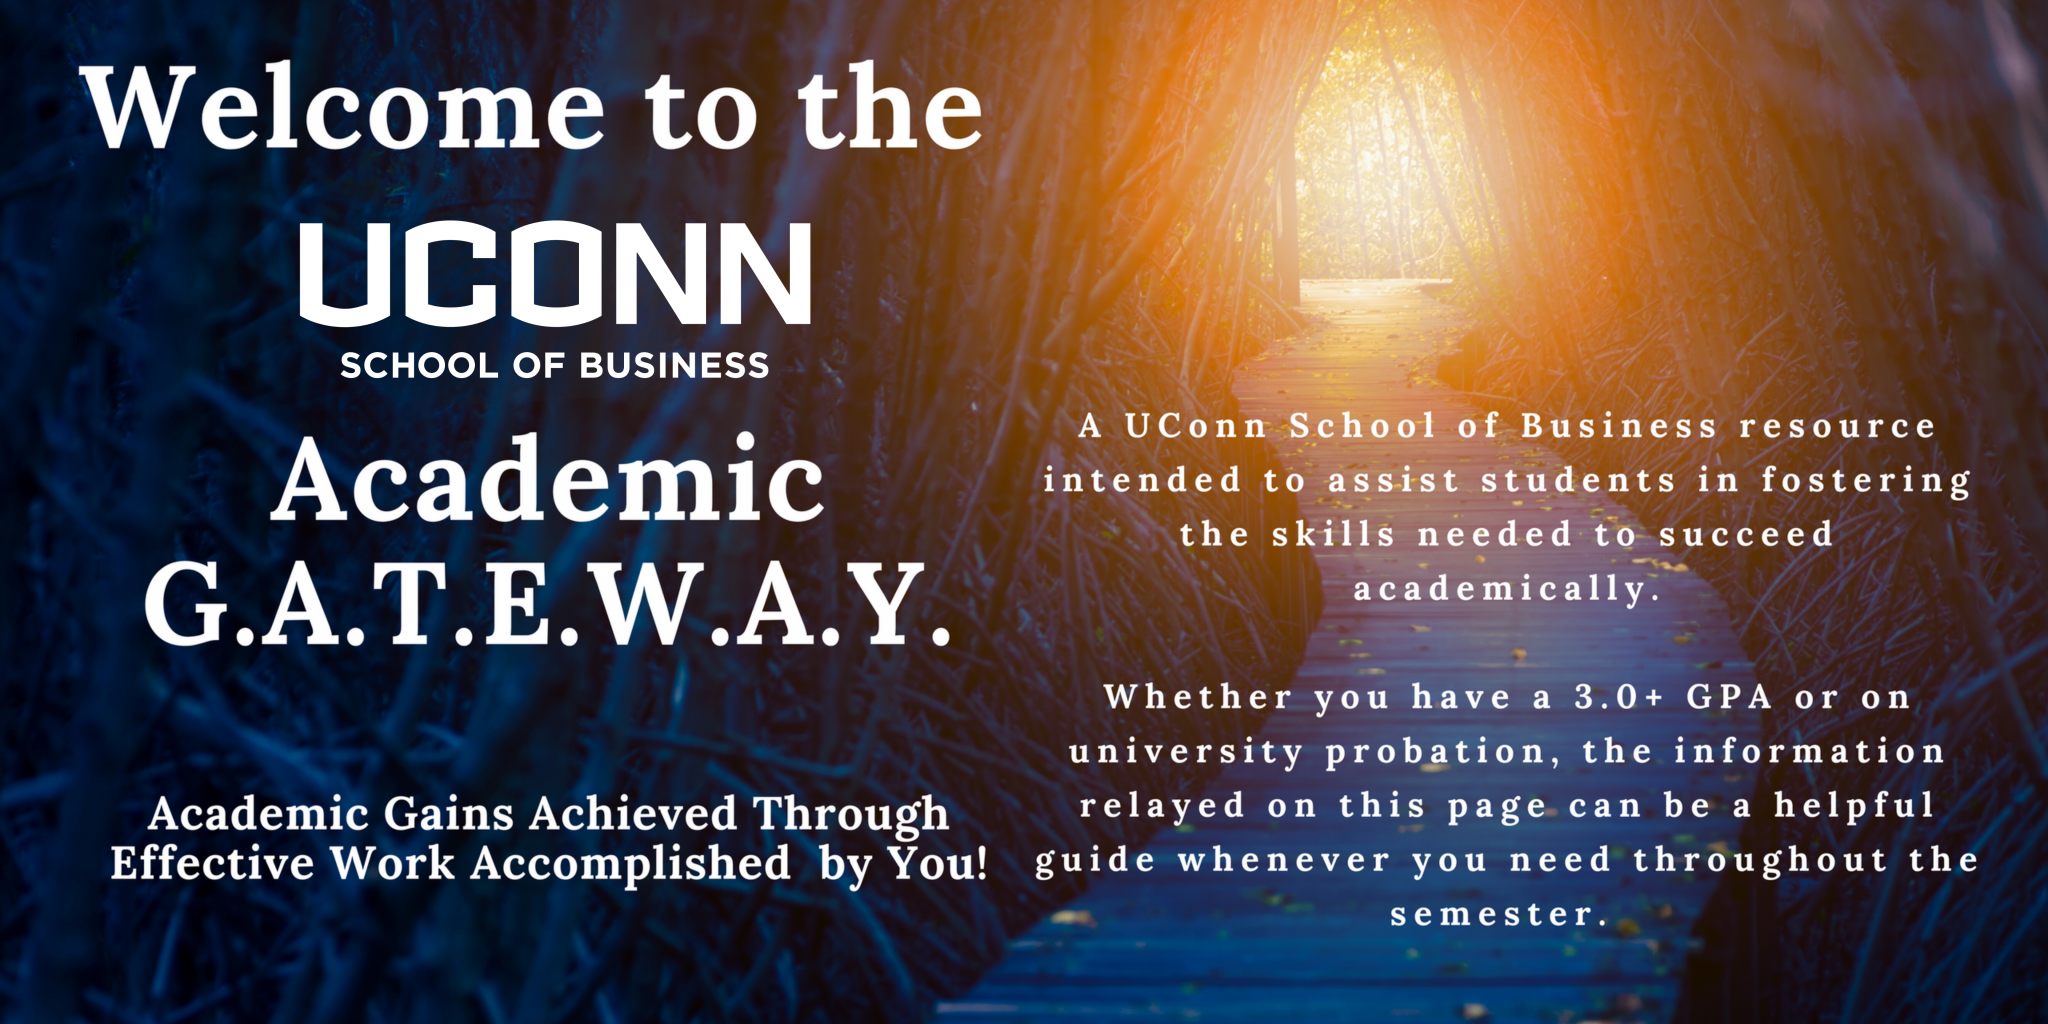 Welcome to the UConn School of Business Academic GATEWAY